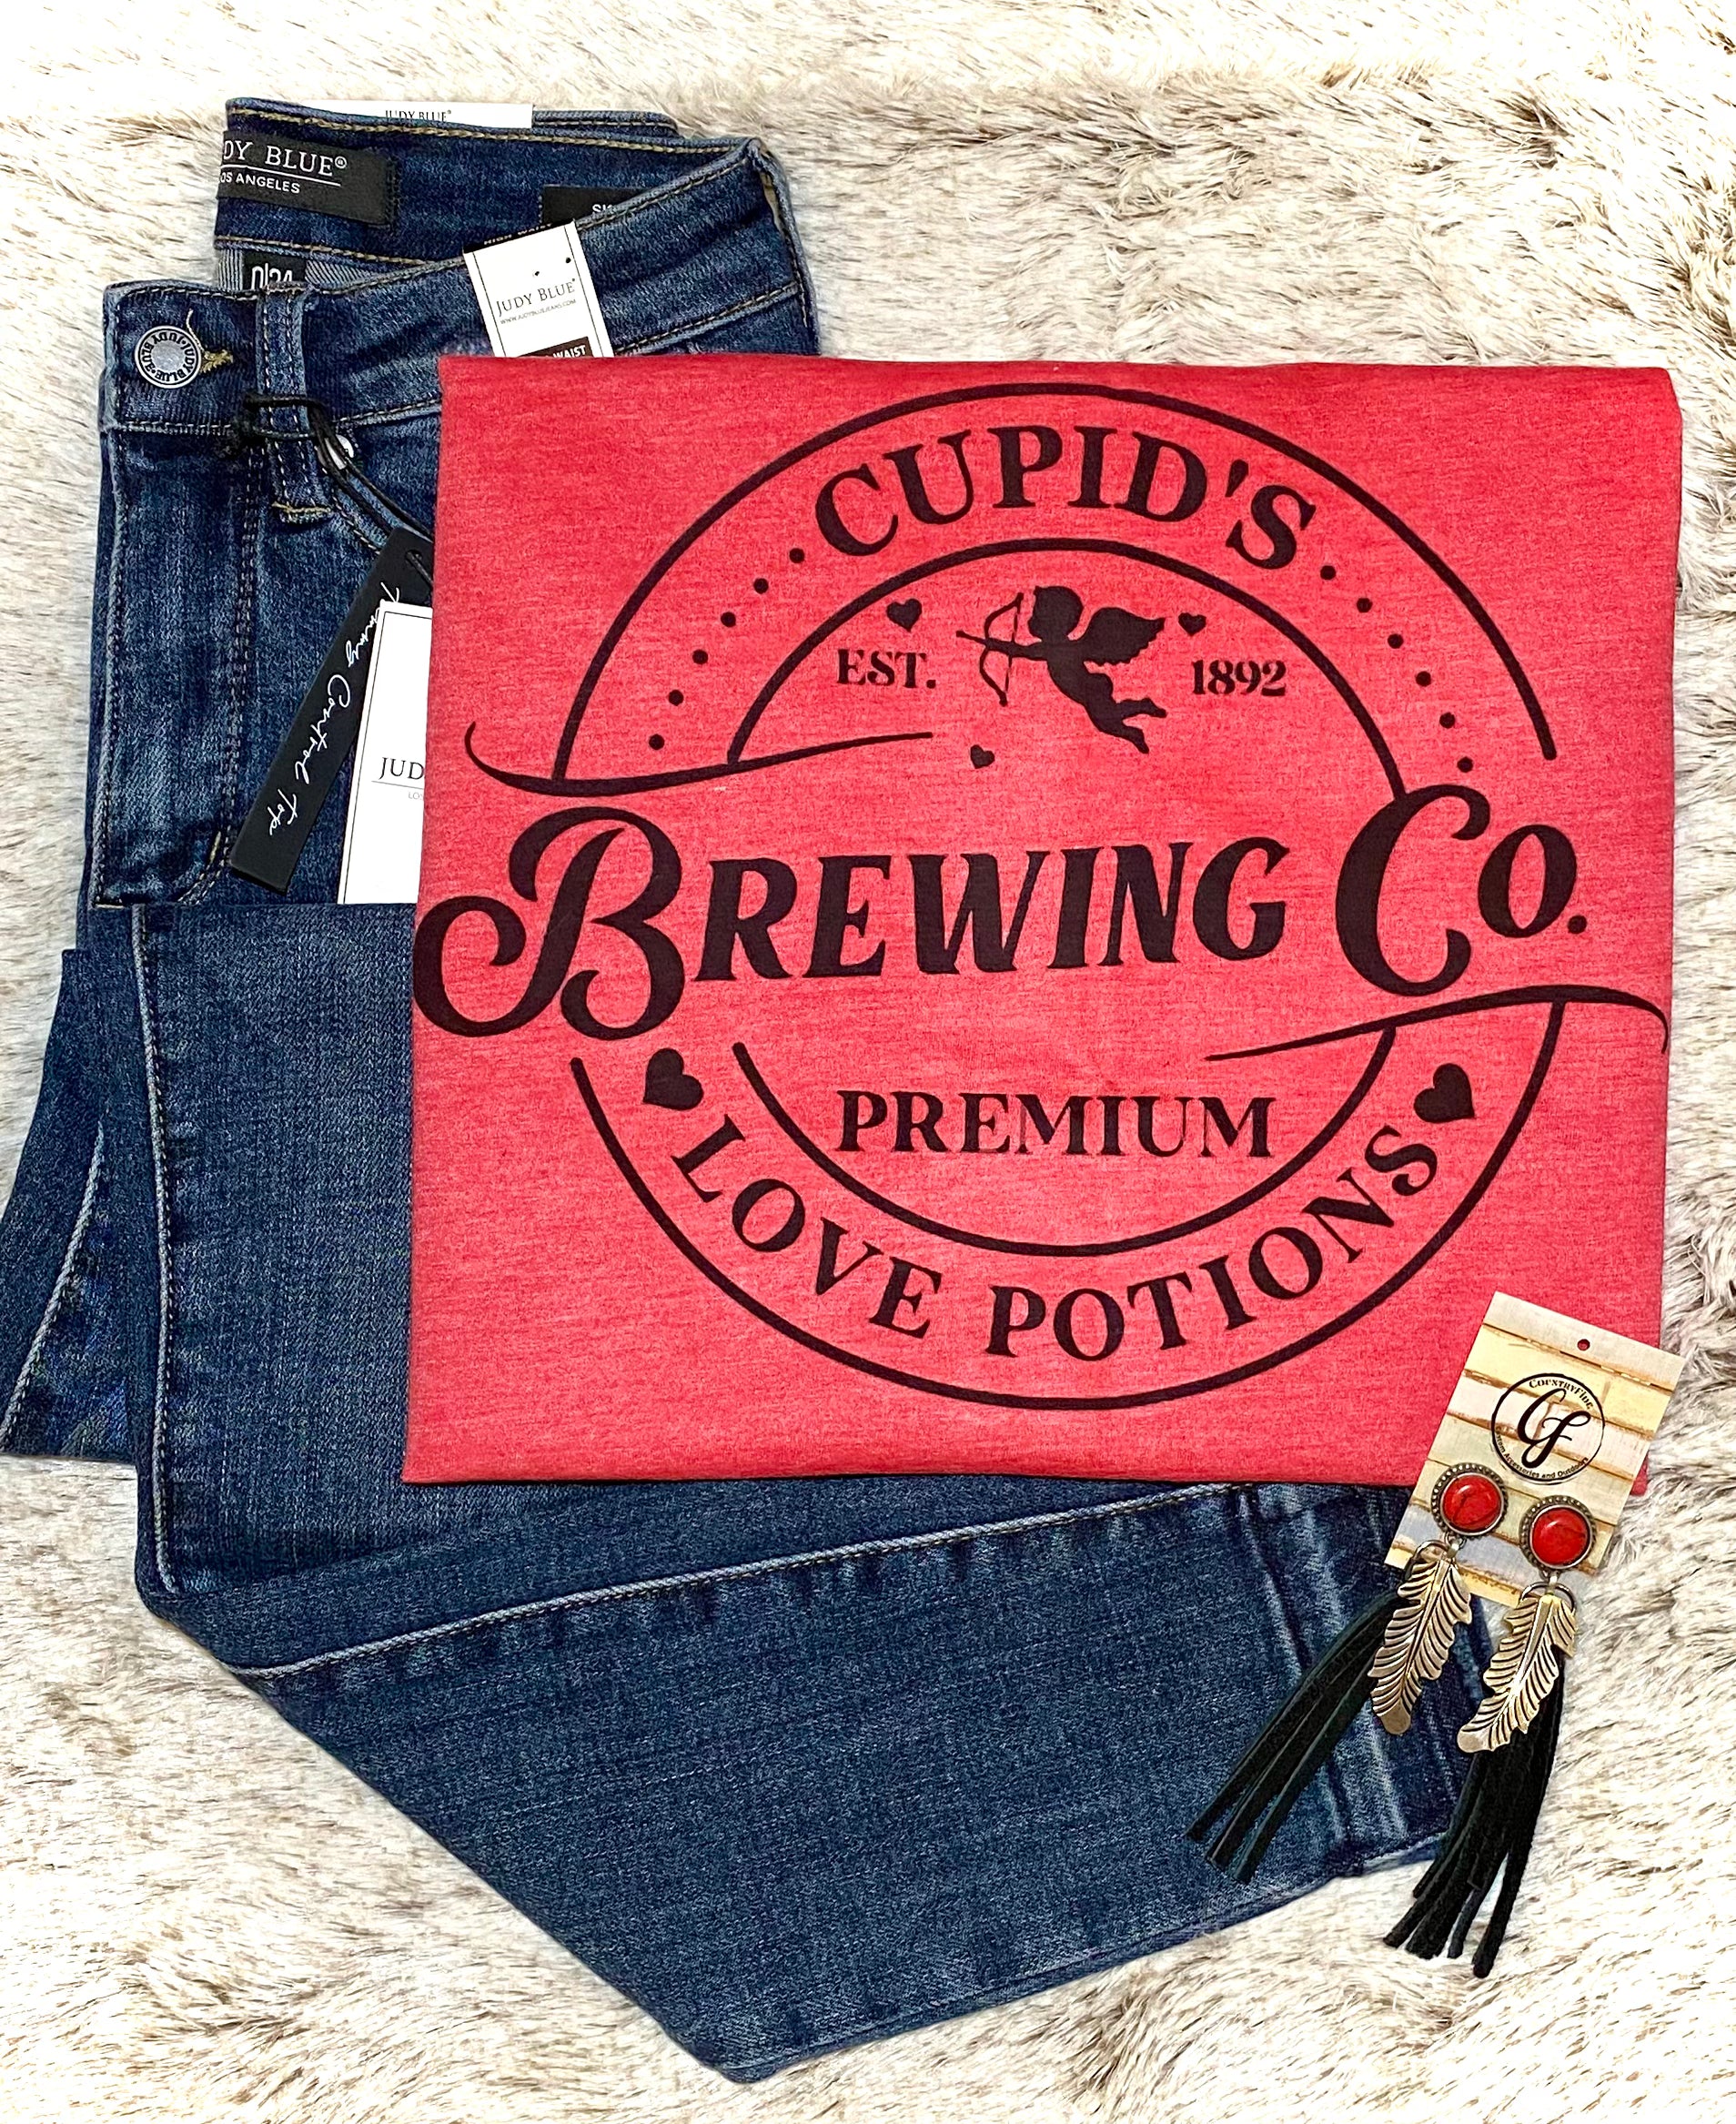 CUPID’S BREWING - CountryFide Custom Accessories and Outdoors